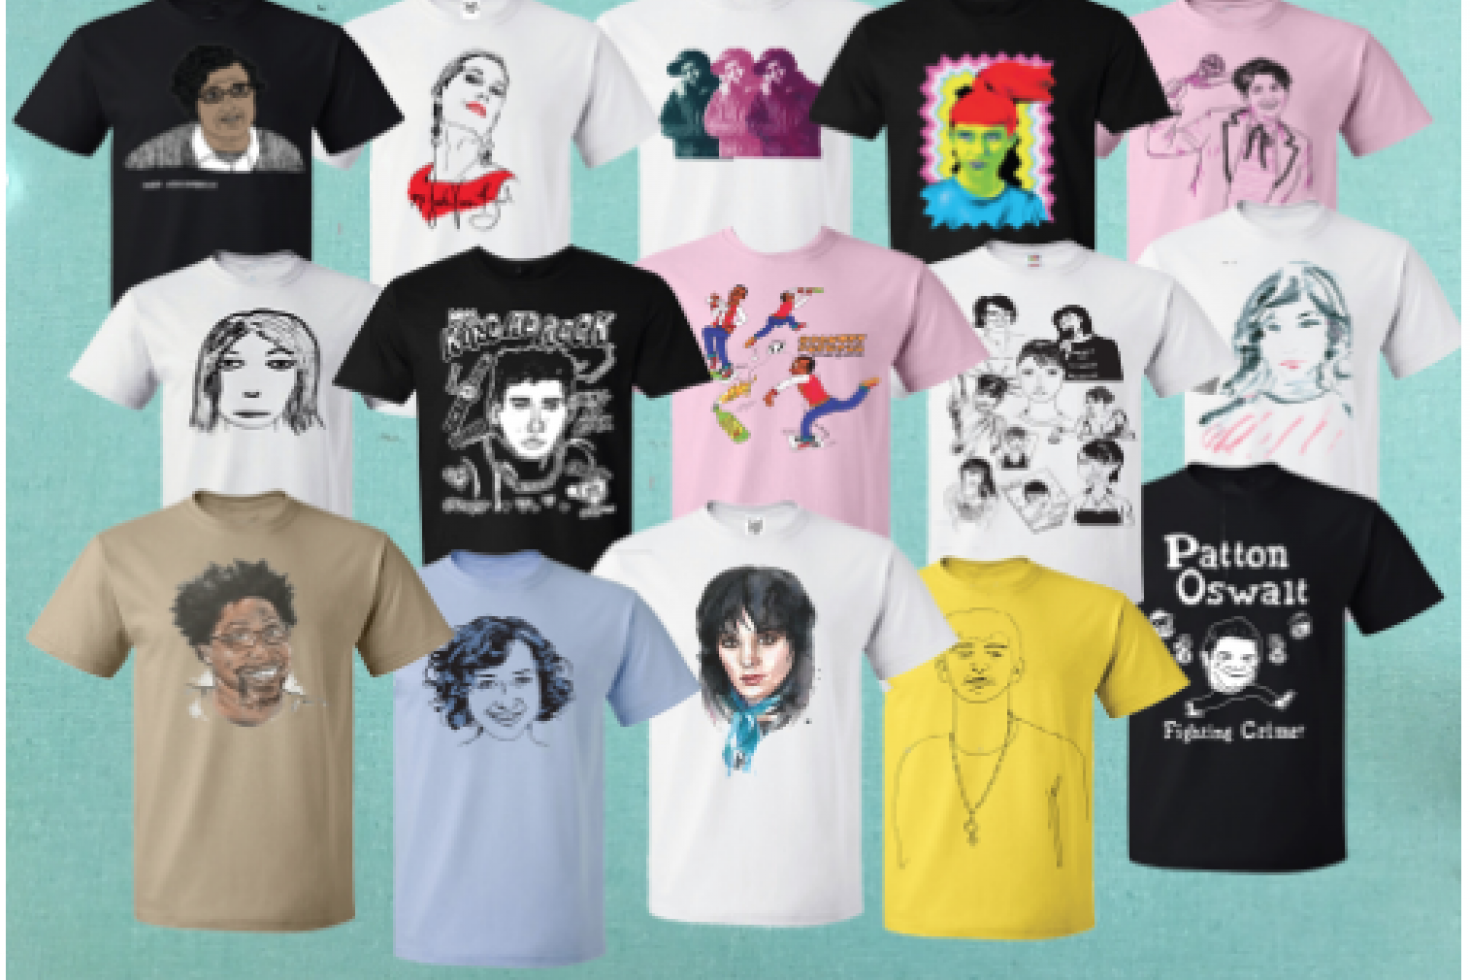 Kathleen Hanna launches TEES 4 TOGO T-shirt line